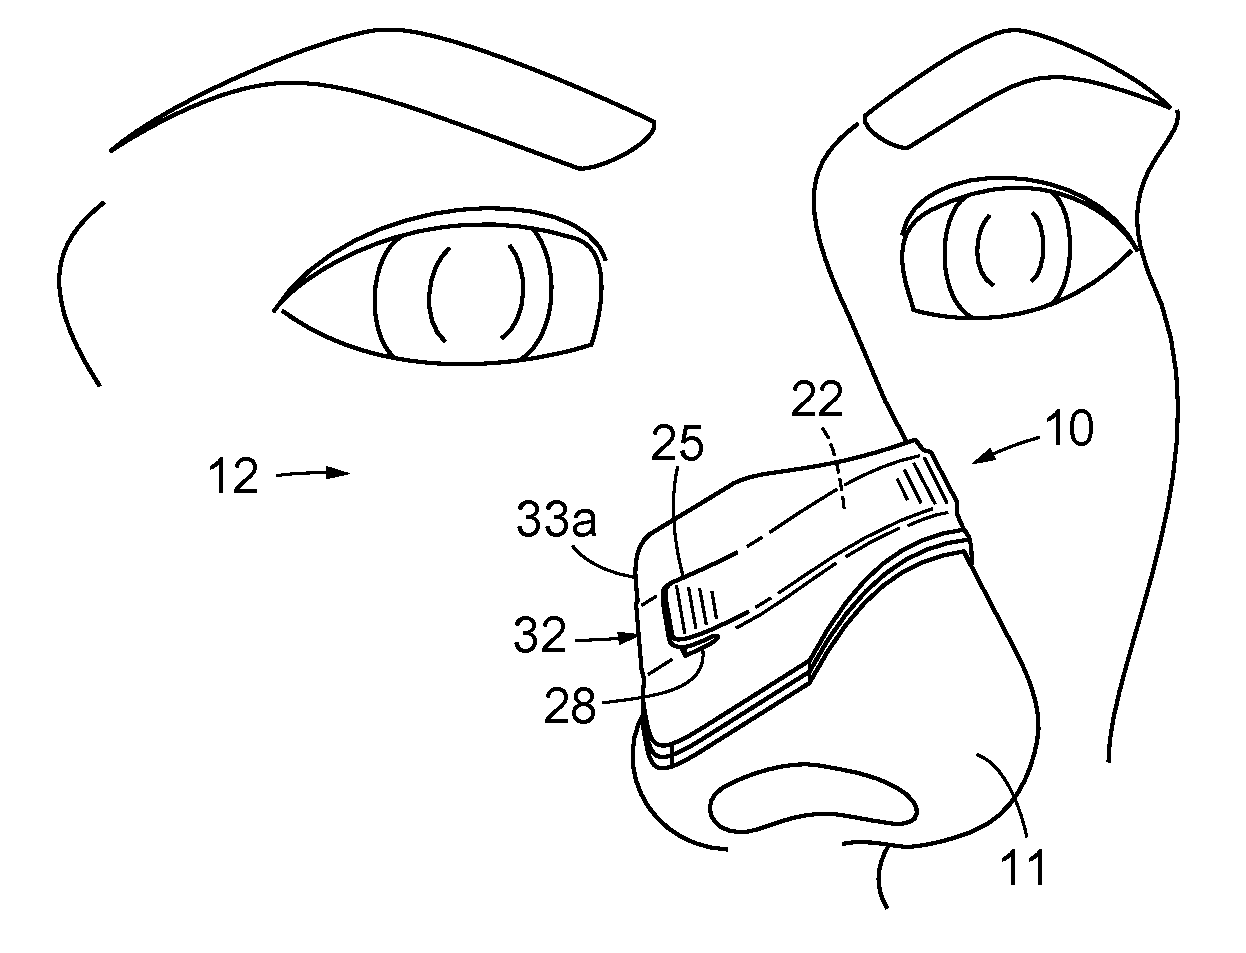 Nasal dilator with means to direct resilient properties